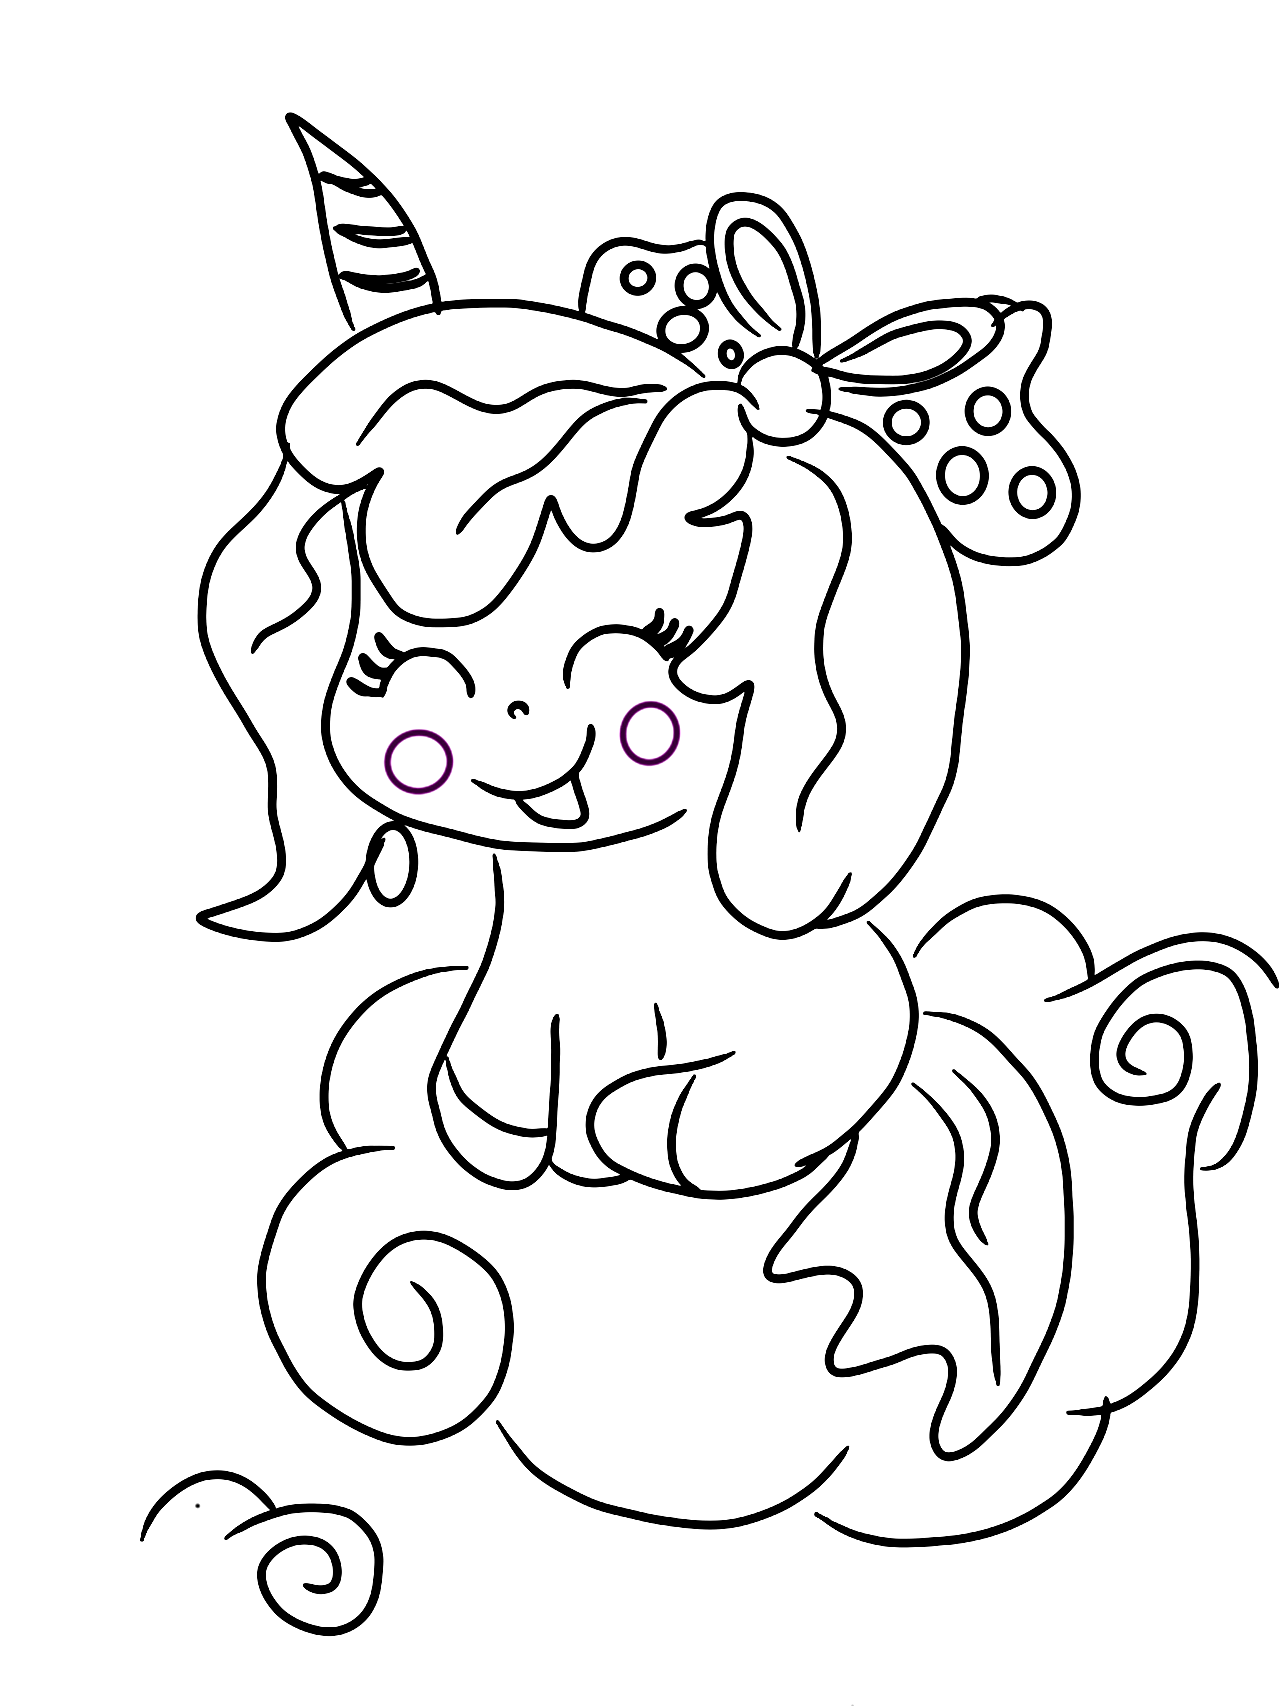 Printable Unicorn Coloring Pages - Part2 (Hand Drawn) » Draw 2 Color